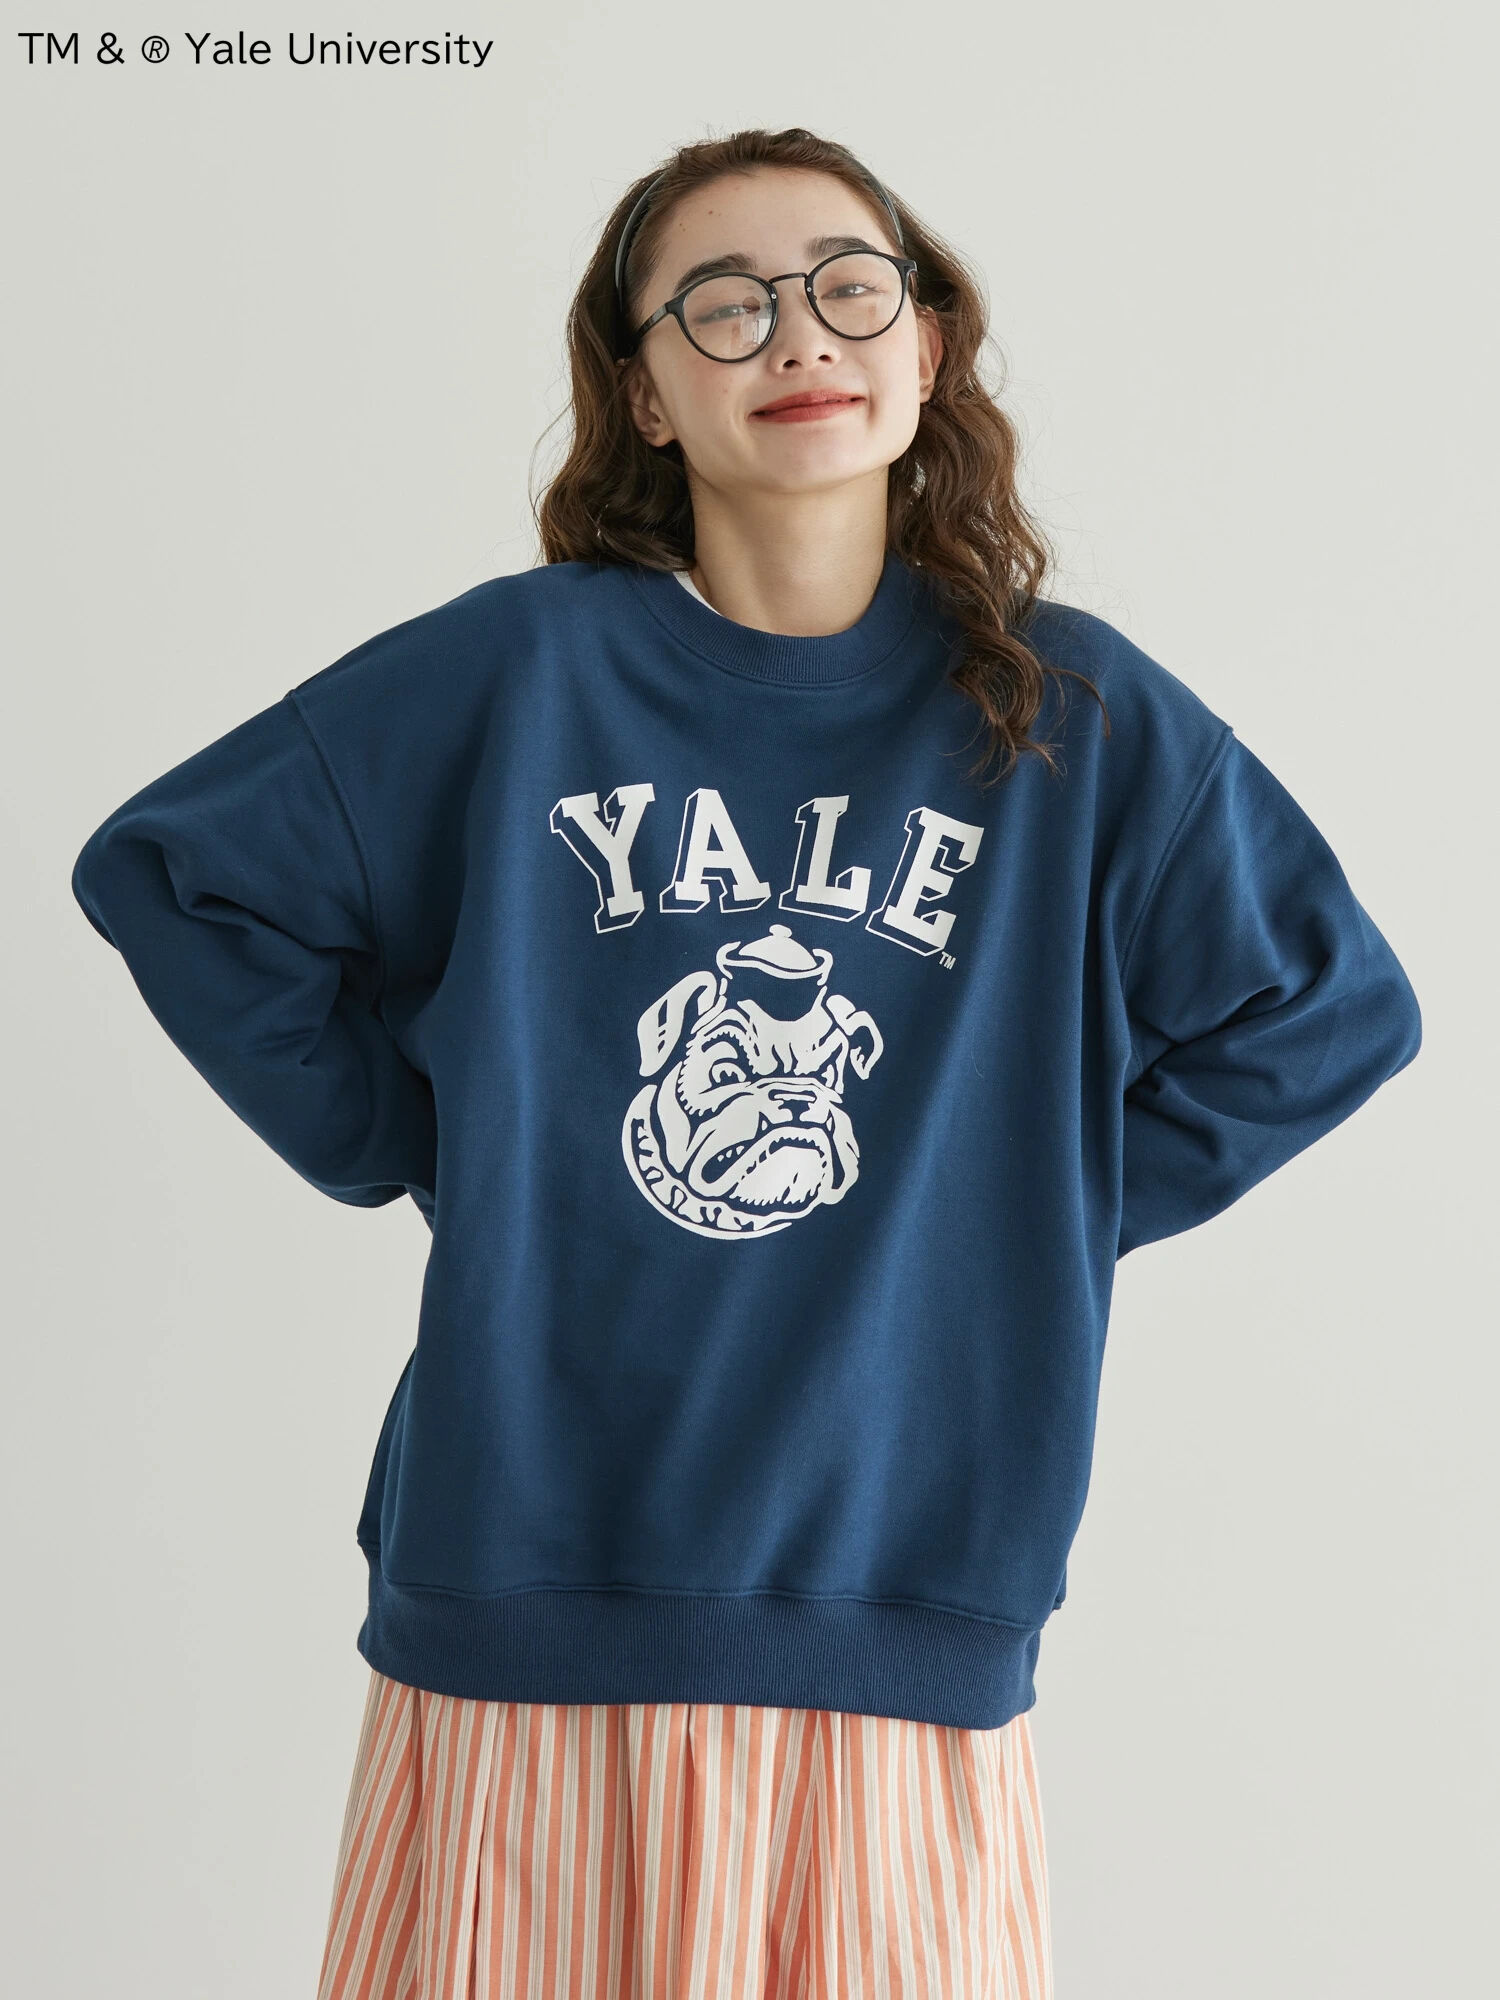 80s 90s Russell YALE イェール大学 スウェット アメリカ製